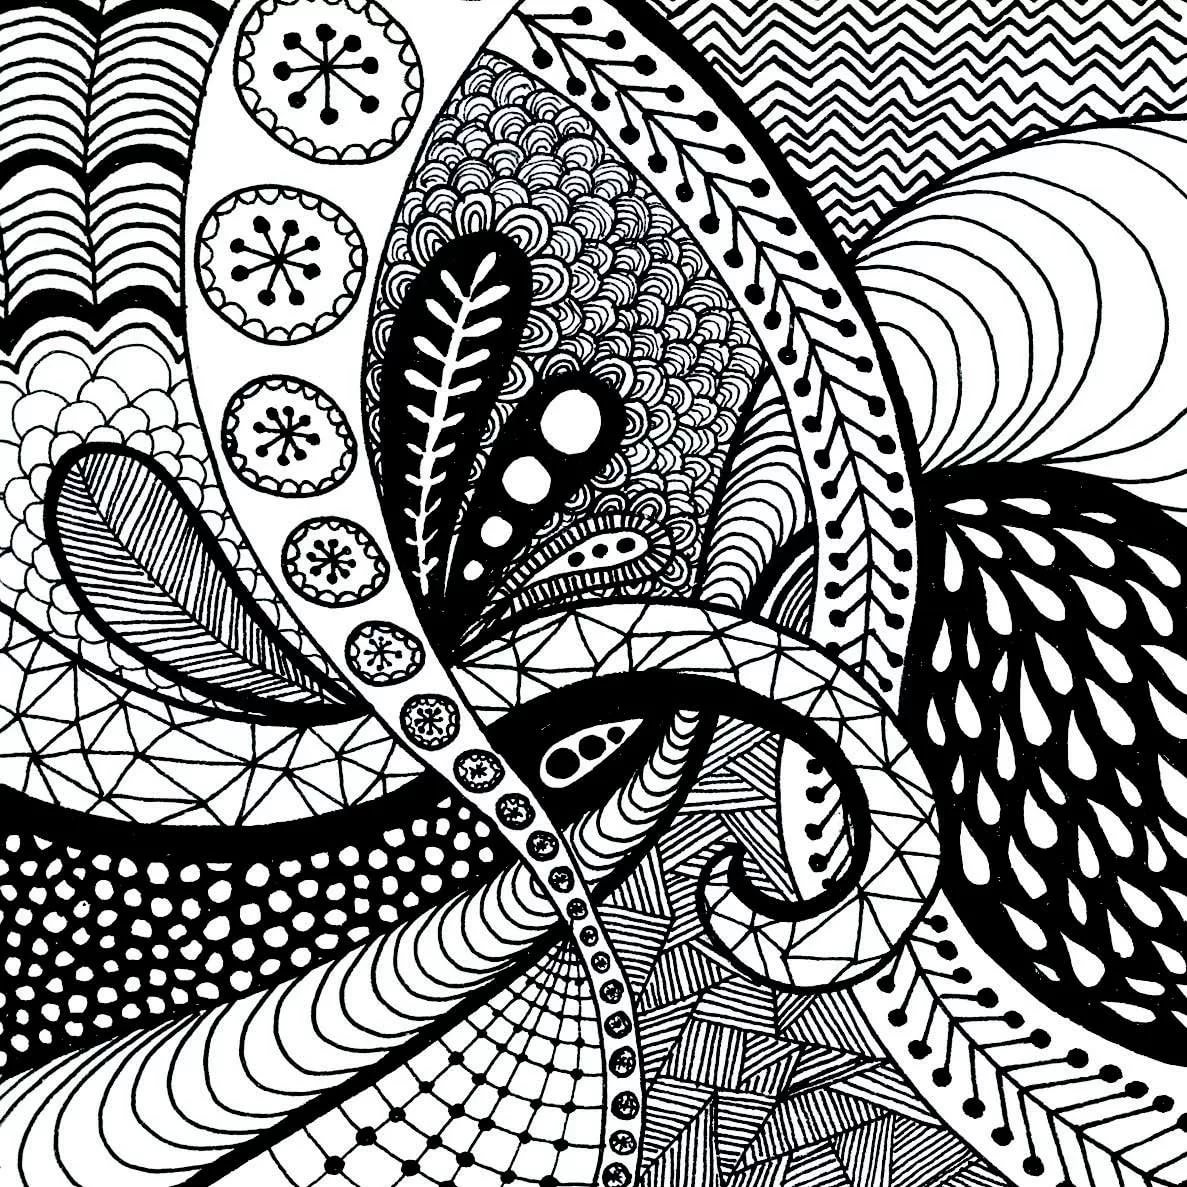 Awesome Coloring Pages   20 Really Cool Images for Free Printable